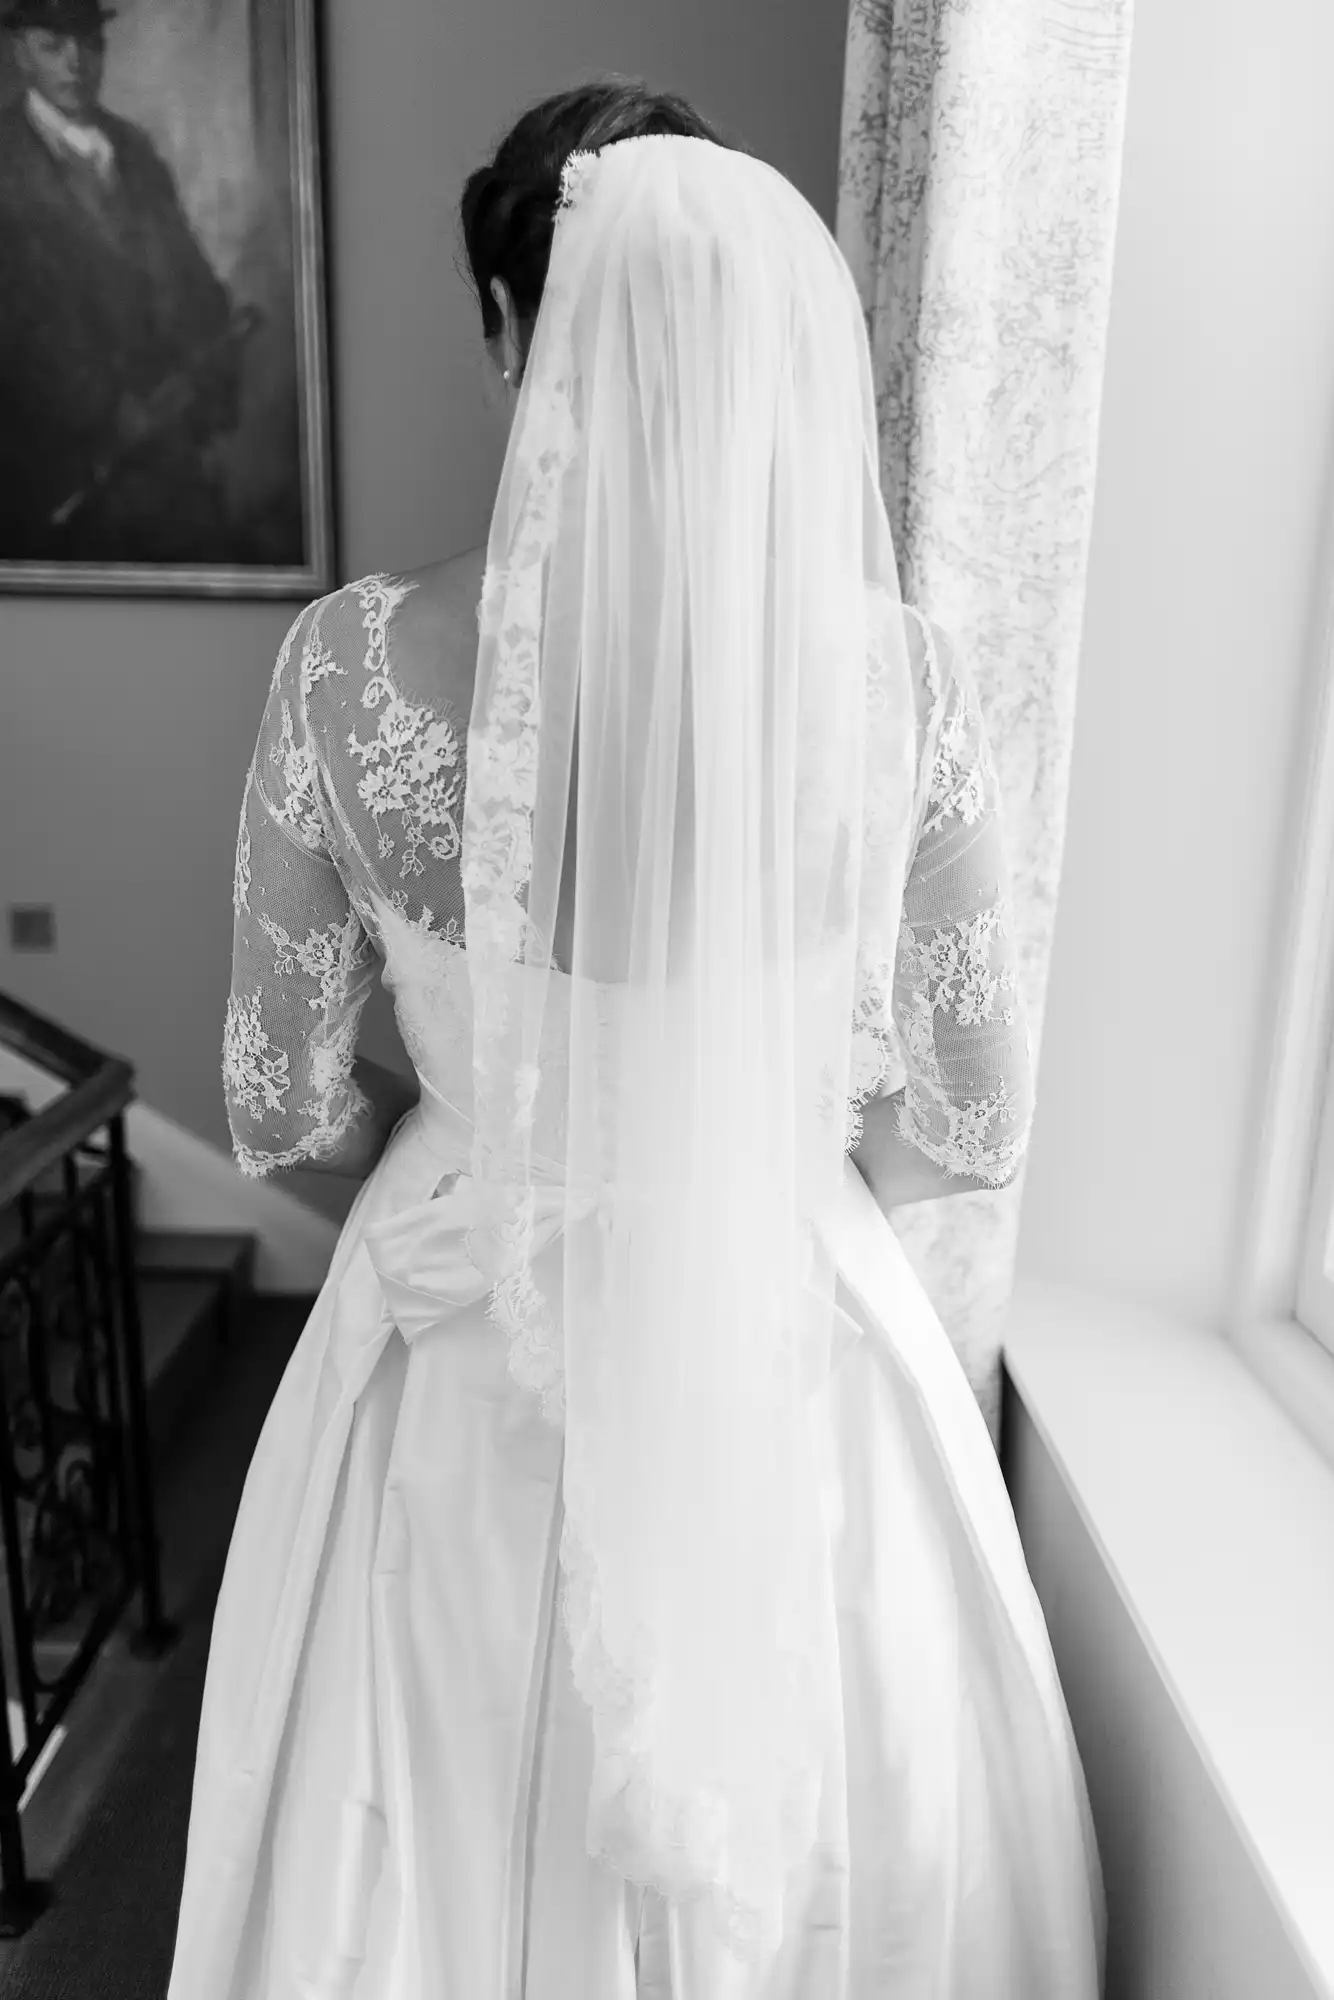 A bride in a lace wedding dress and veil, viewed from behind, looking out a window in a softly lit room.